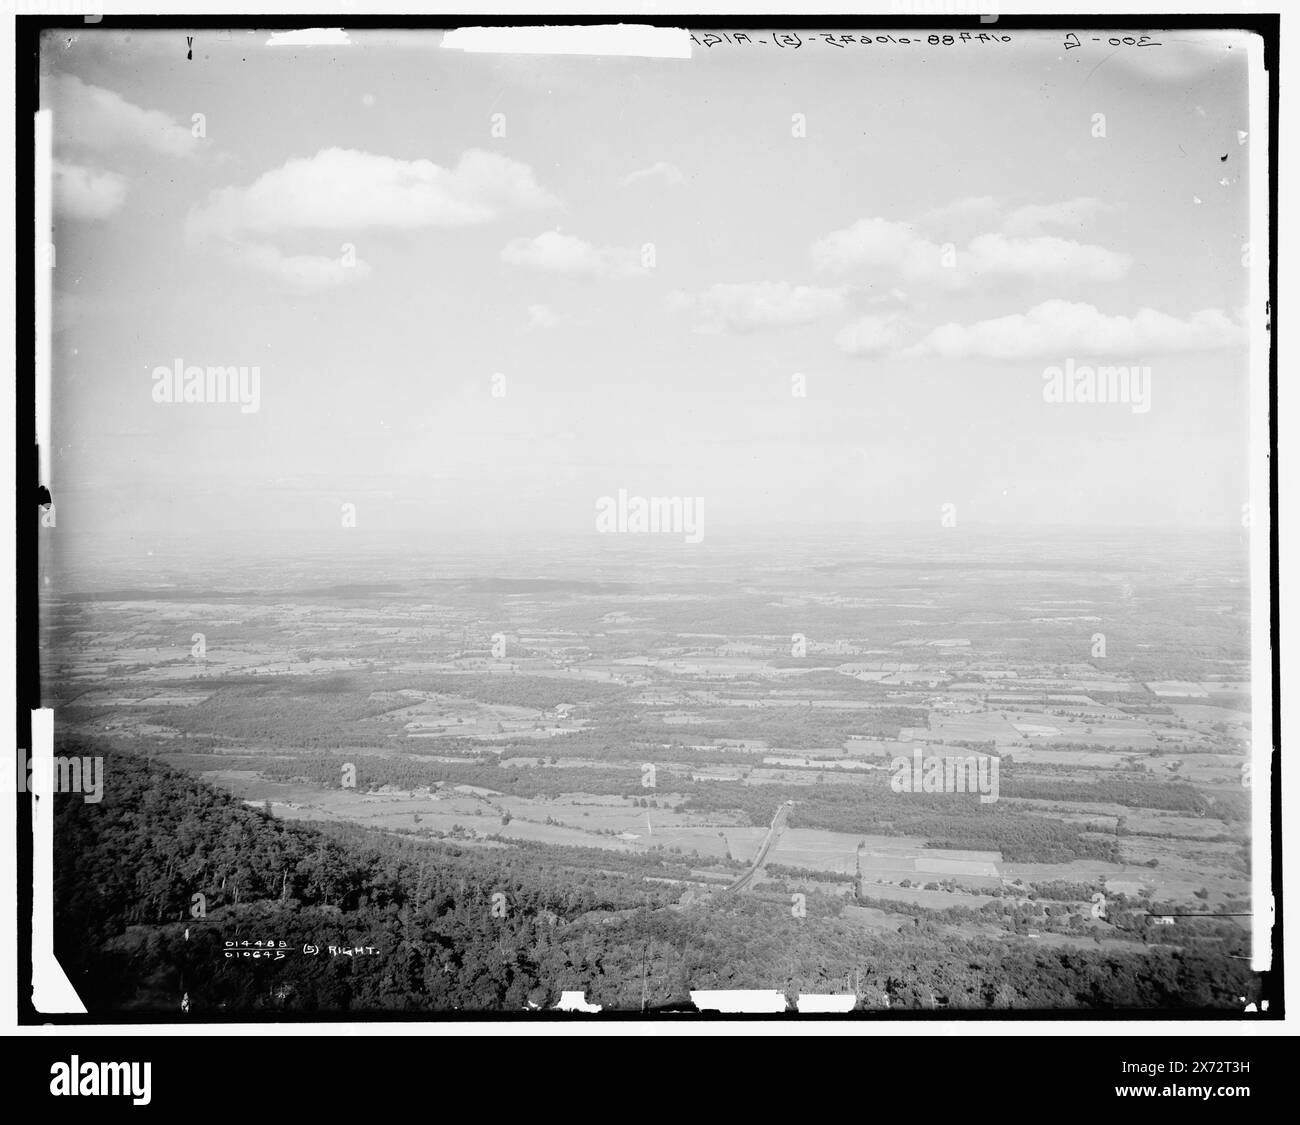 Catskill Mountain House and Hudson River Valley, Catskill Mountains, N.Y., Videodisc images out of sequence; actual left to right order is 1A-06381, 09603, 06380, 06379, 06378., '303-G' on left negative; '304-G' on left center negative; '305-G' on center negative; '300-G' on right negative., Right and right center negatives broken and taped to second sheet of glass; center negative cracked at top., Detroit Publishing Co. nos. 010645 and 014488., Gift; State Historical Society of Colorado; 1949,  Catskill Mountain House. , Hotels. , Flags, American. , Mountains. , Valleys. , United States, New Stock Photo